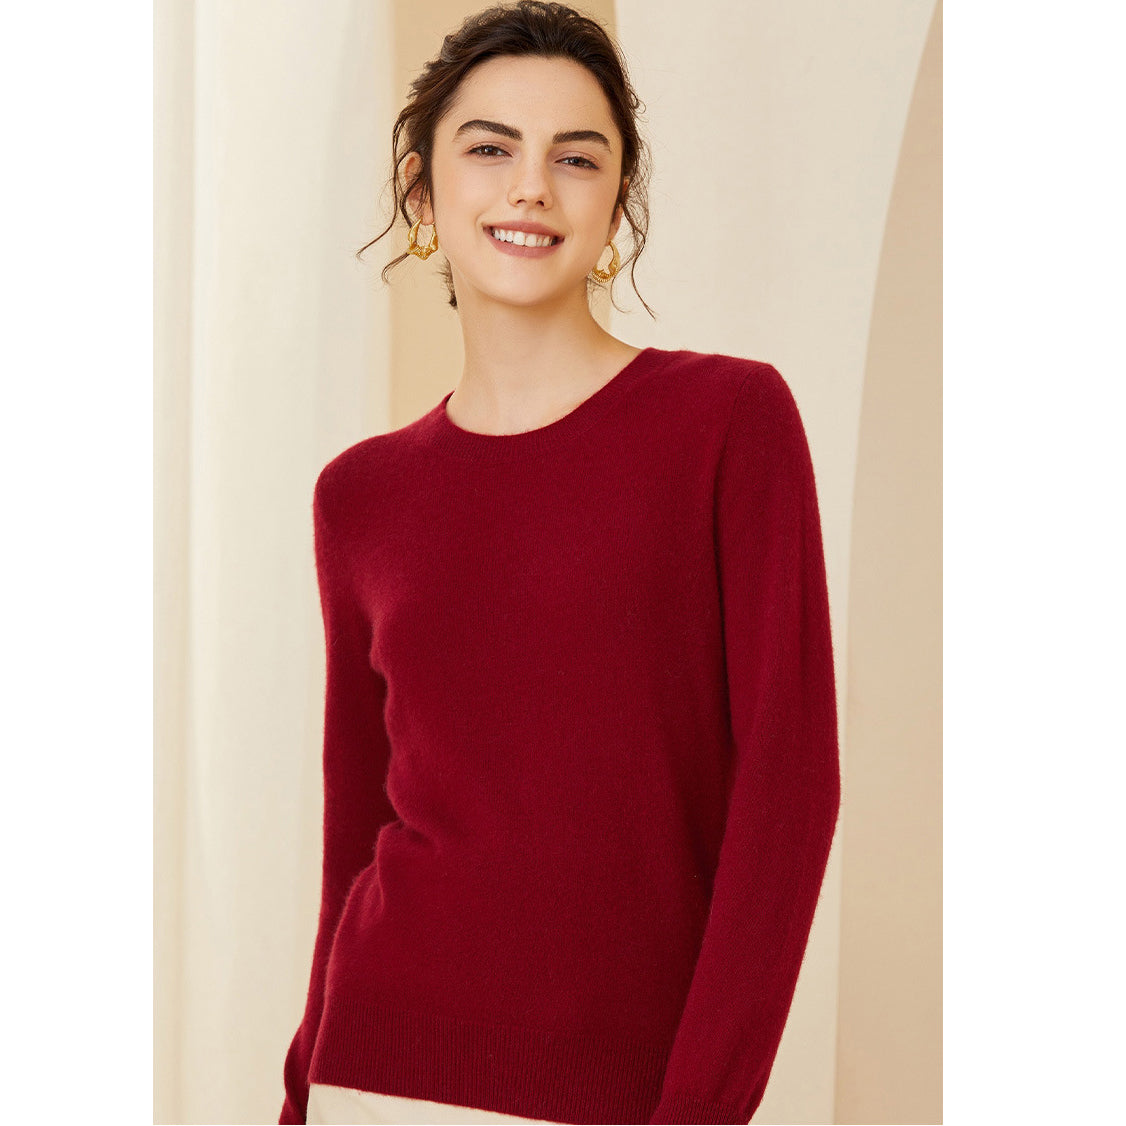 Cashmere Sweater for Women Classic Long Sleeve Pullover Cashmere Tops